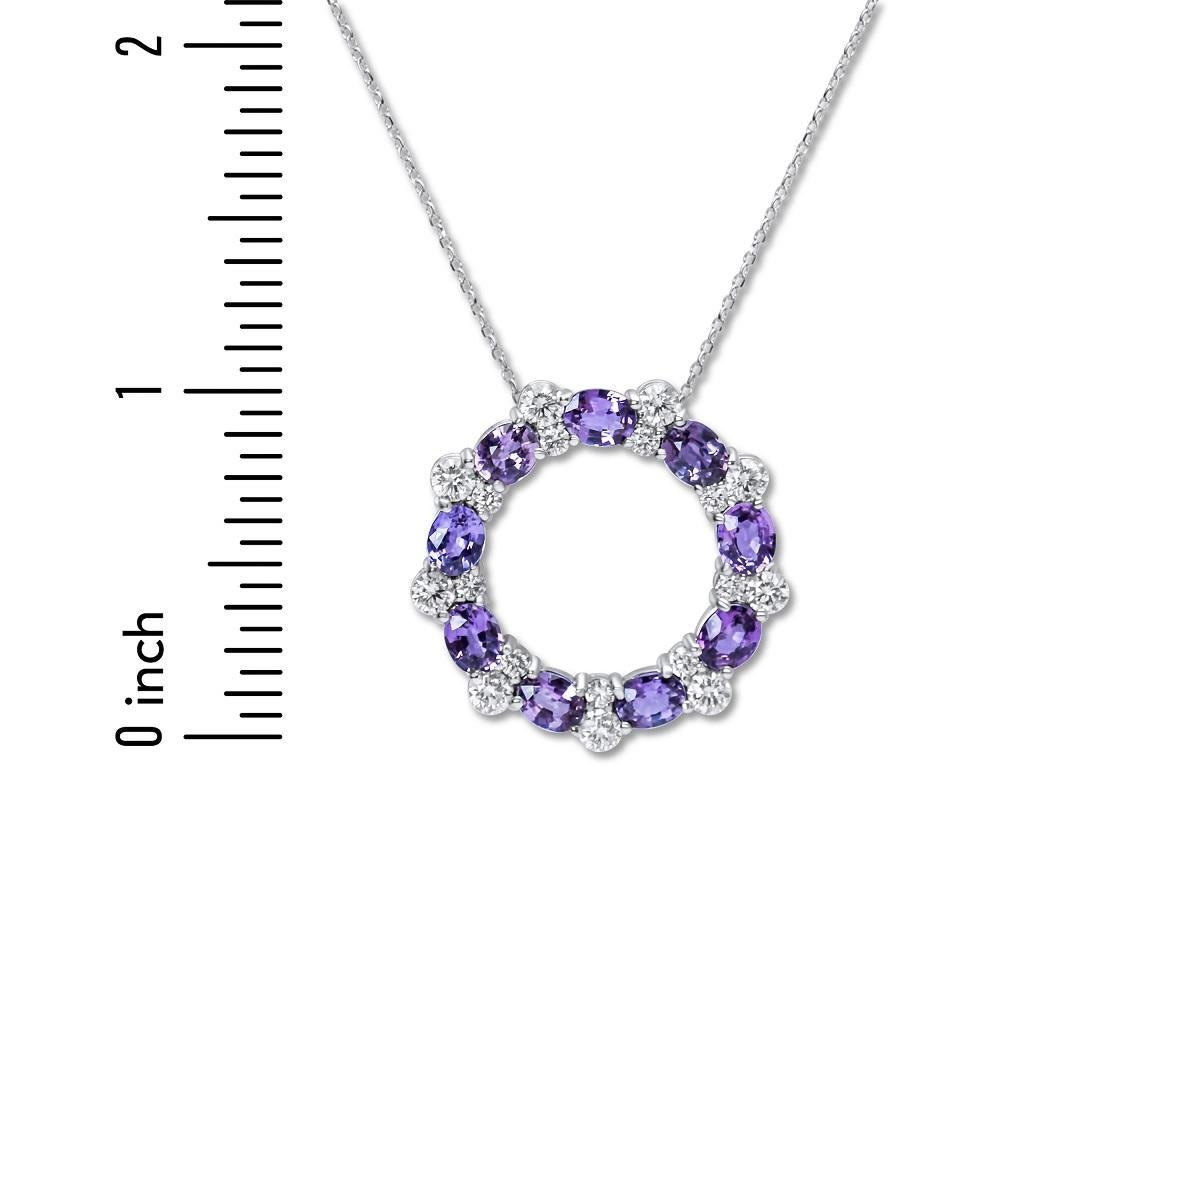 3.46 Carat Oval Purple Sapphire and Diamond Circle Pendant in 14k Gold ref2302 In New Condition For Sale In New York, NY